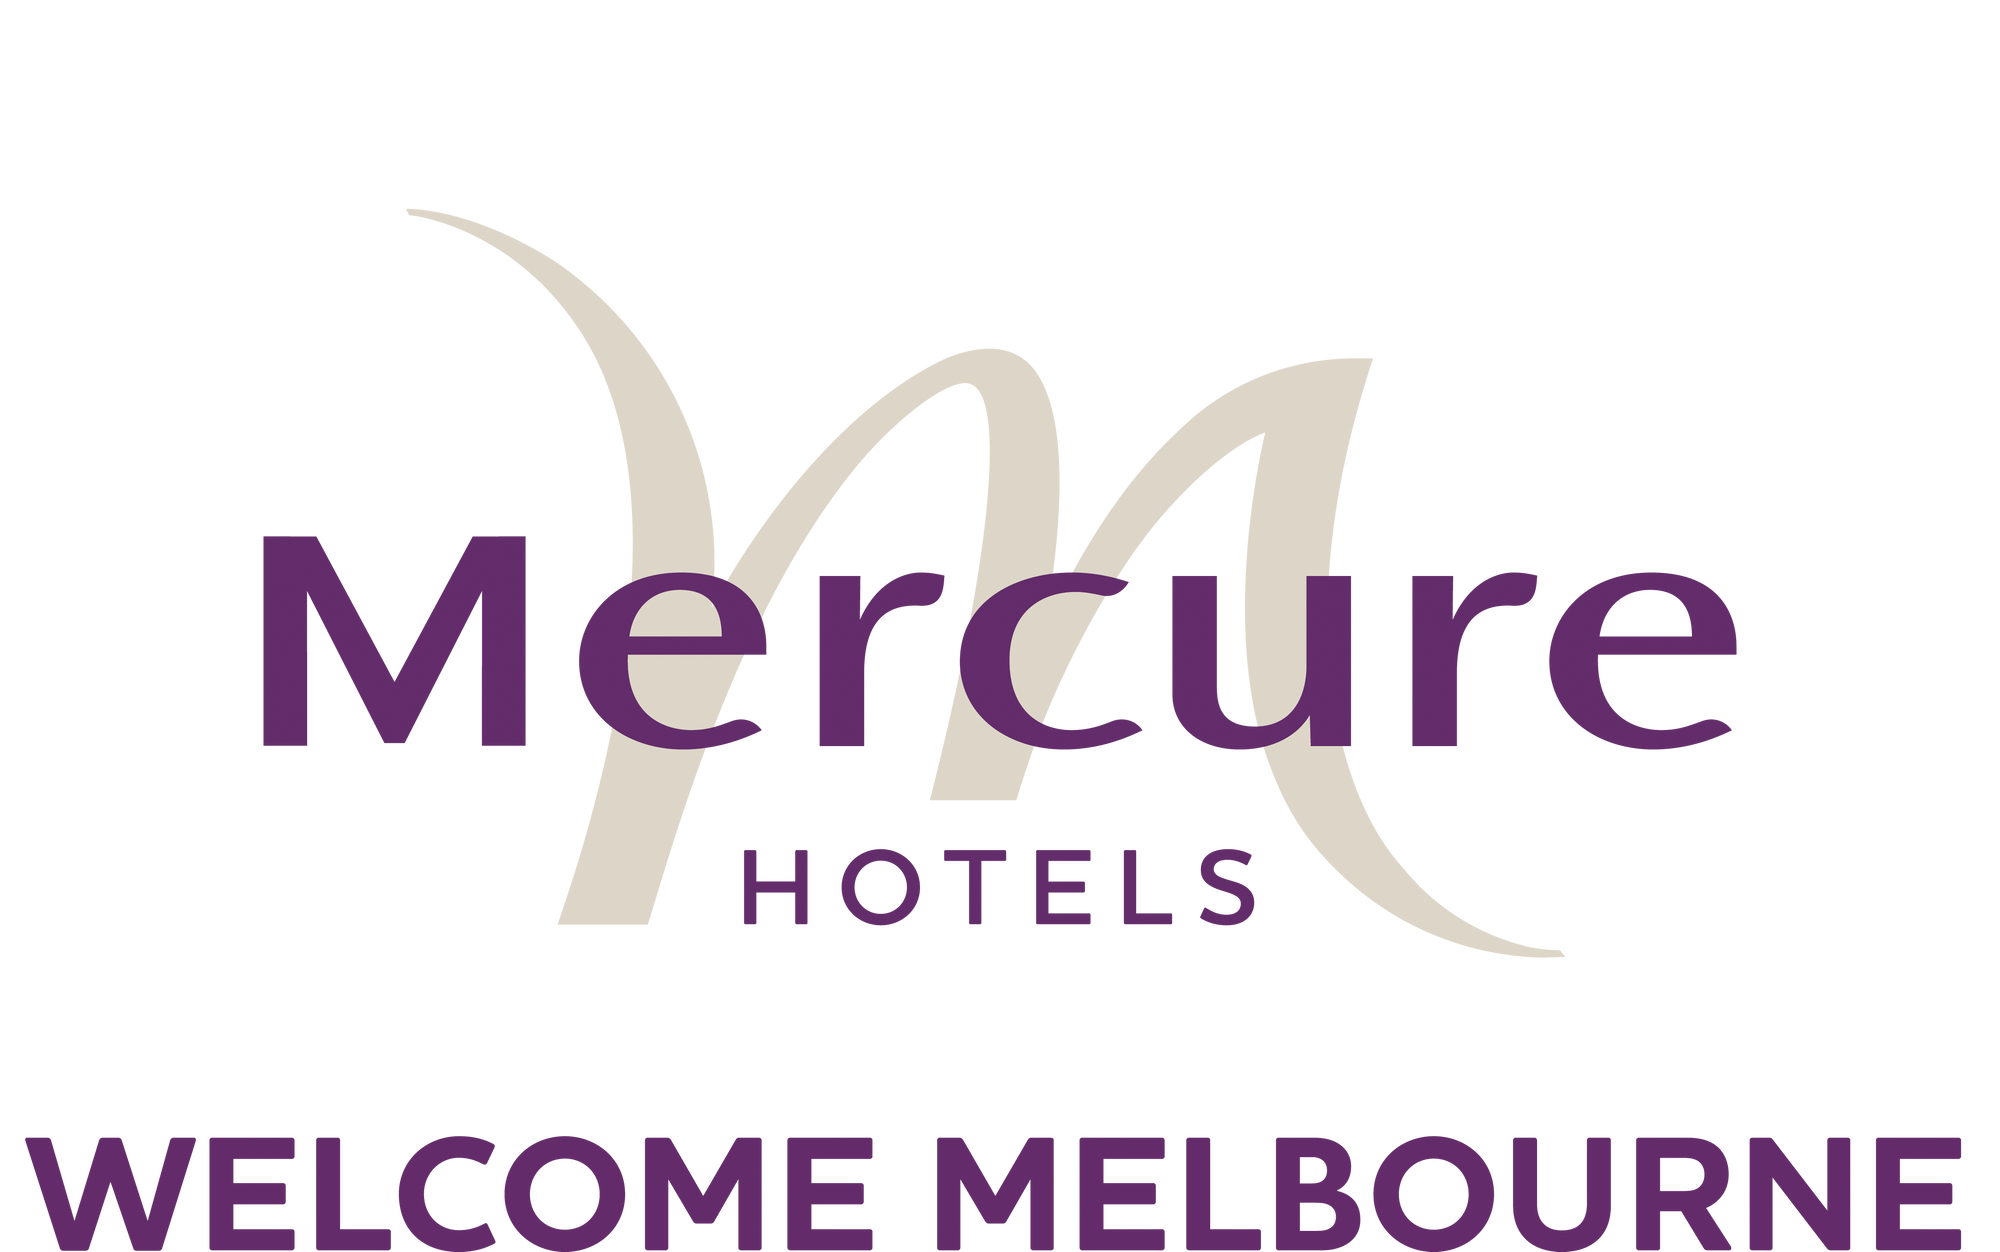  Official logo of Mercure Hotels